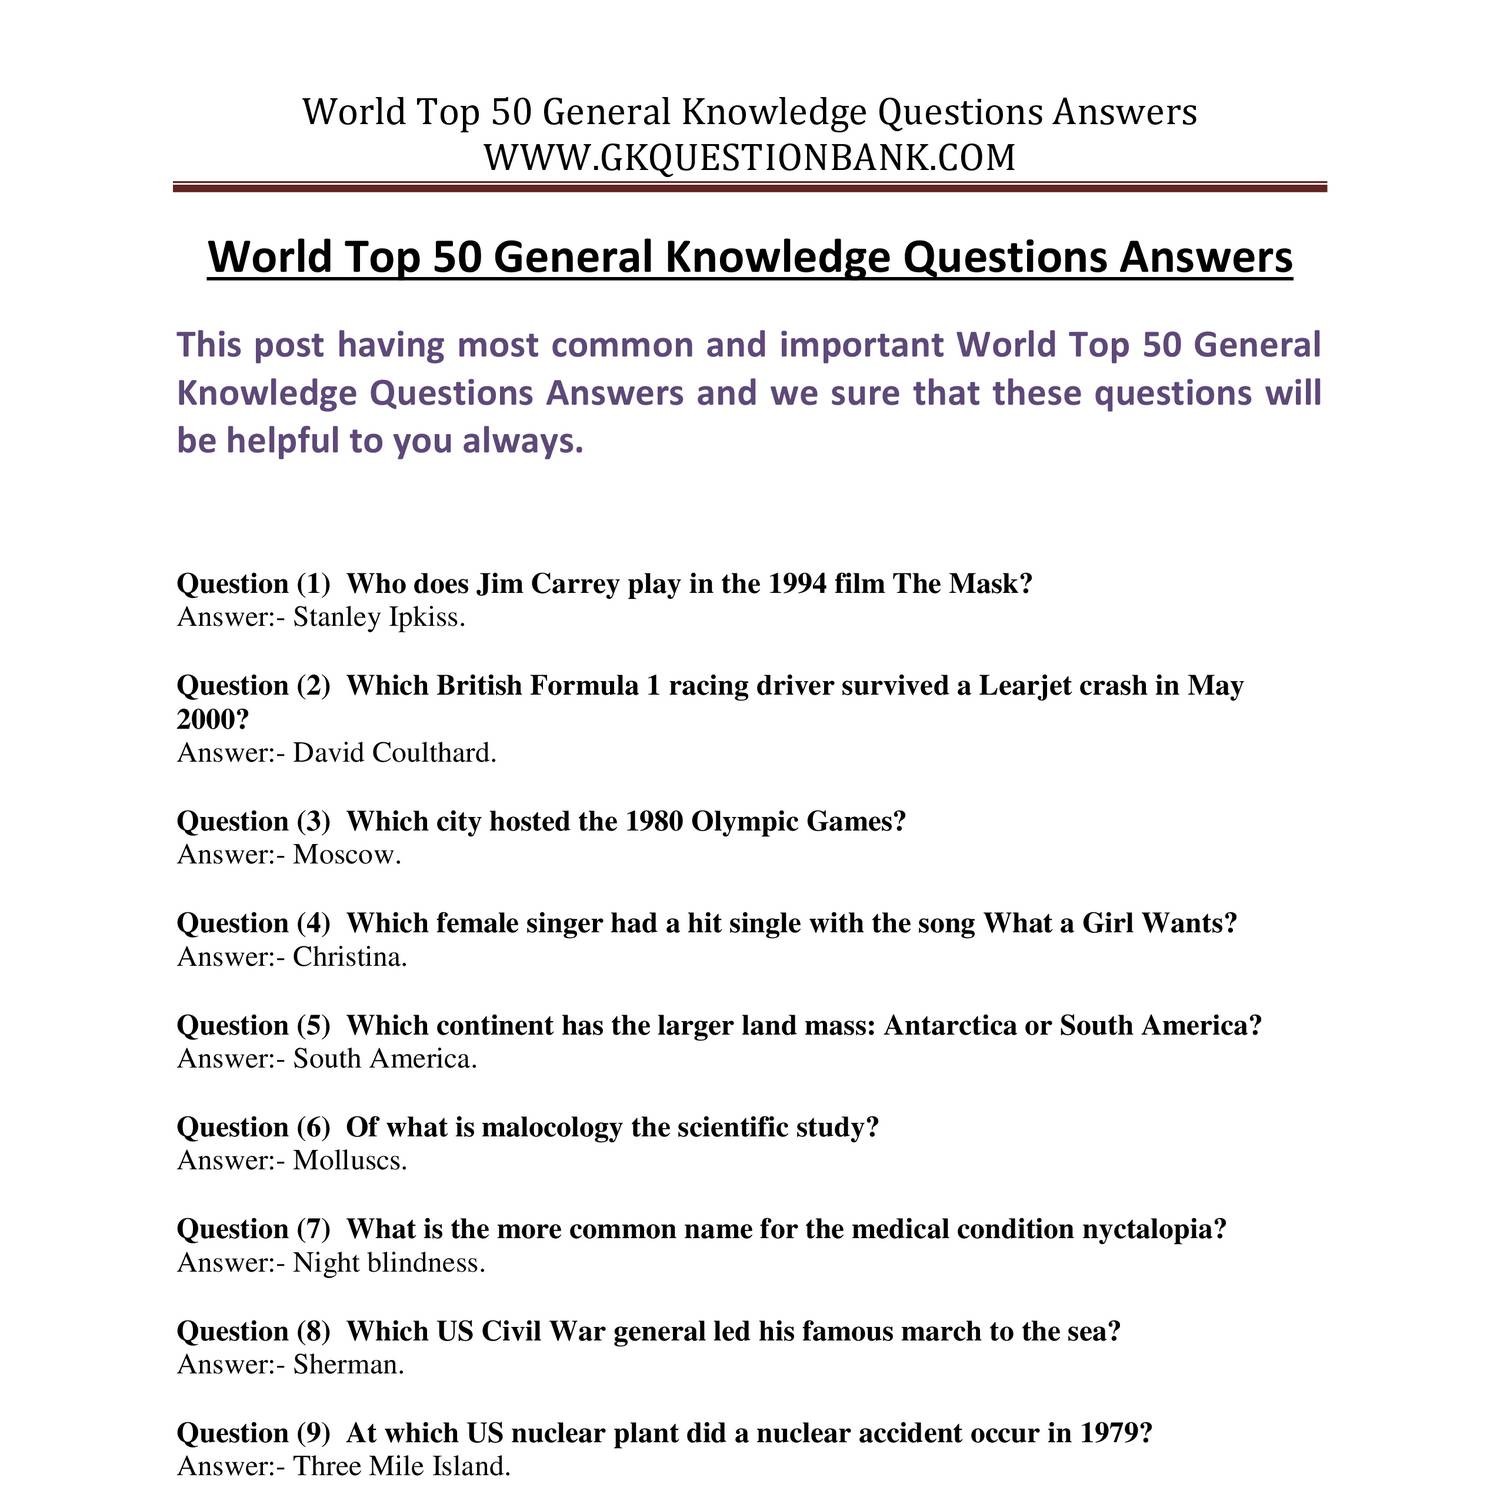 Download World Top 50 General Knowledge Questions Answers docx DocDroid